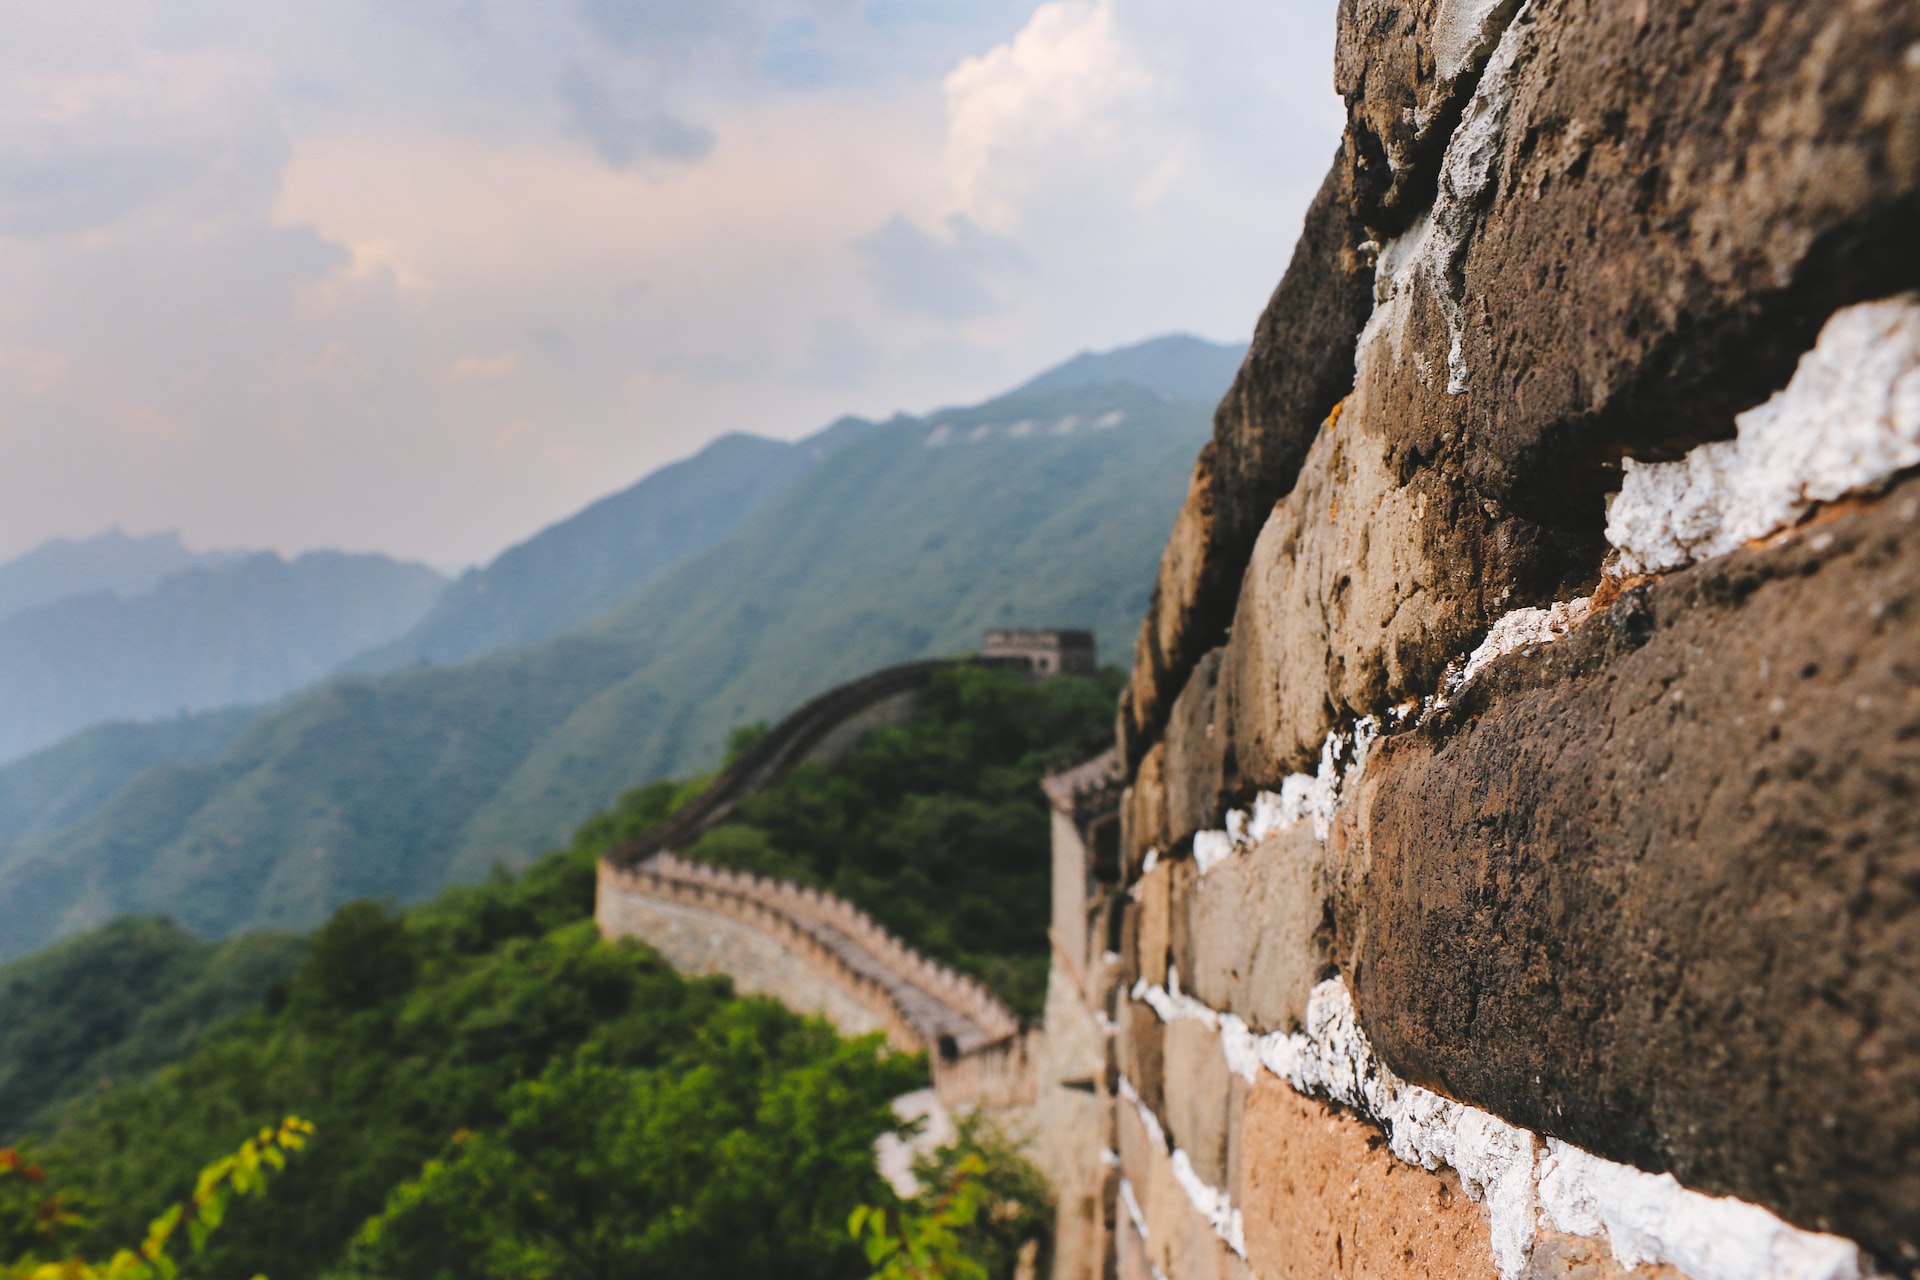 Teacher On Tour: Why I Loved My Trip to China